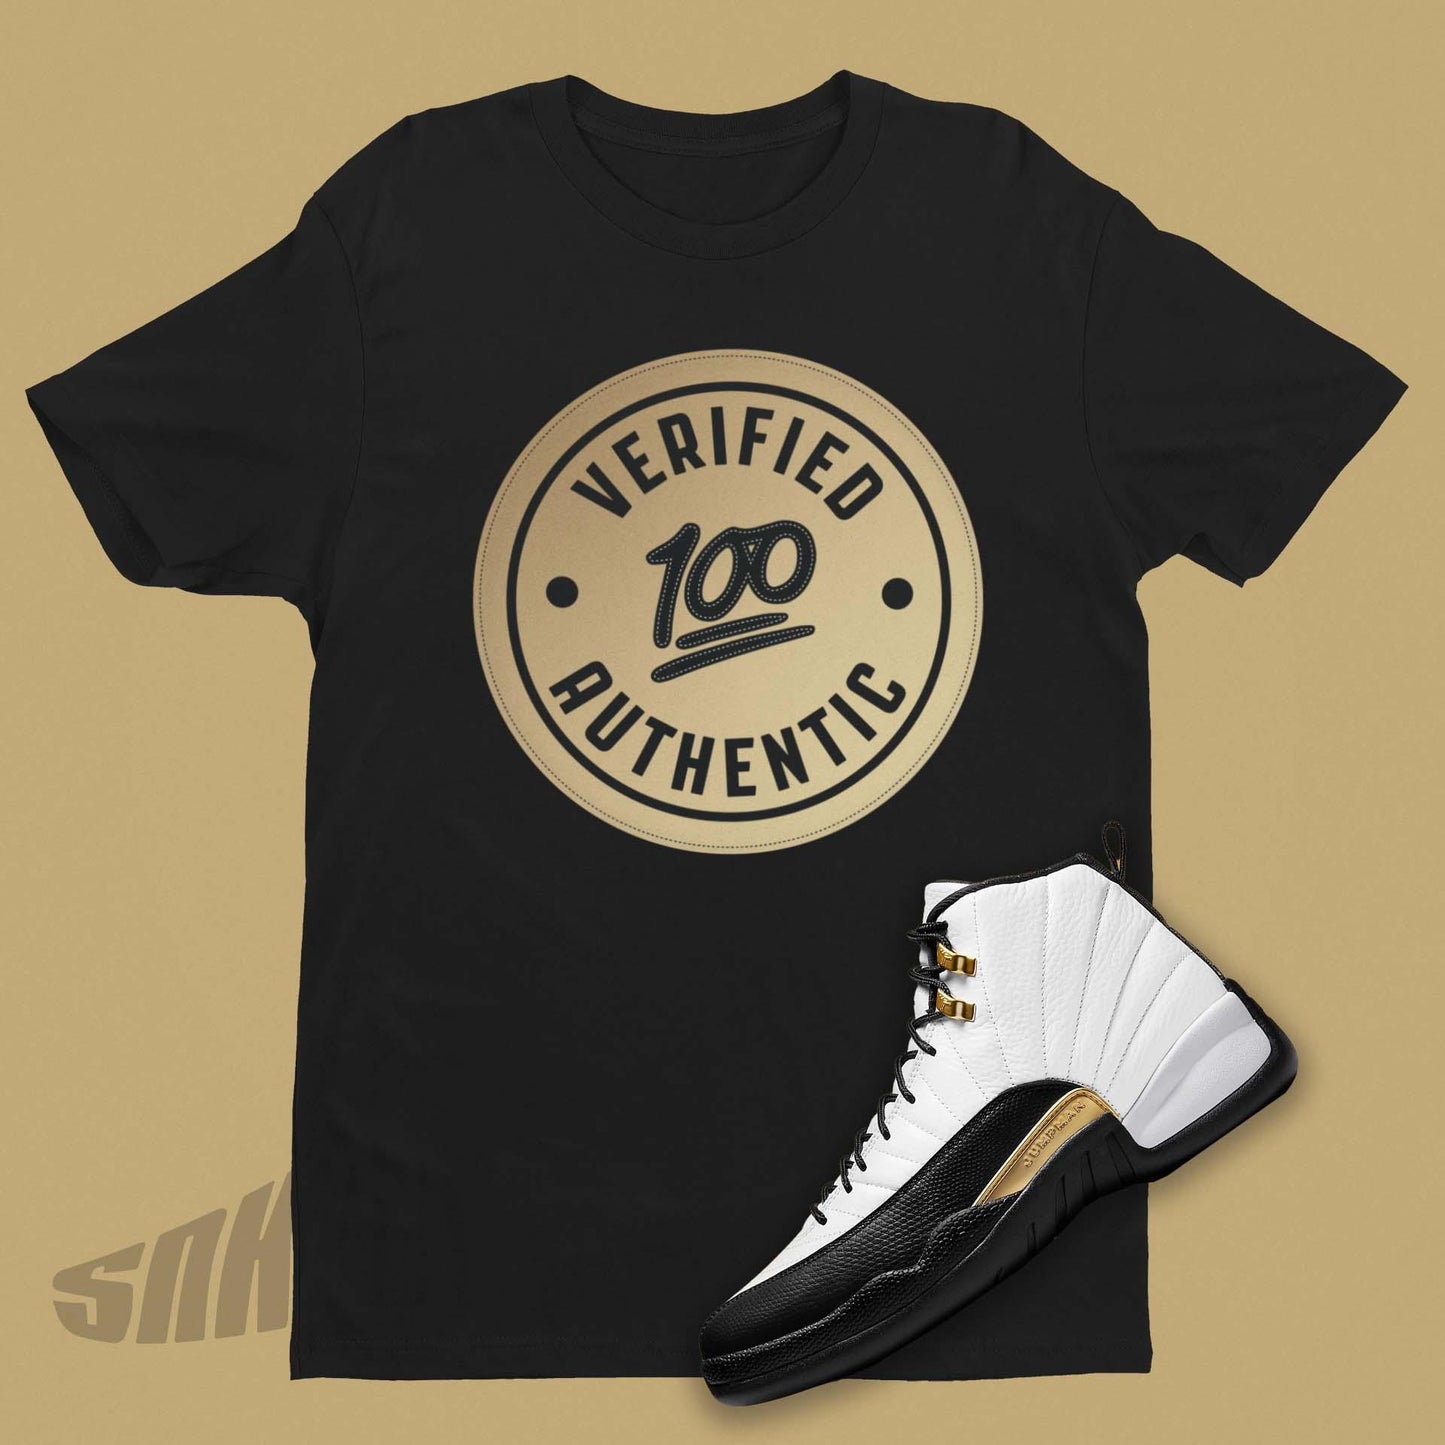 Verified Authentic in Gold on Black T-Shirt Match Air Jordan 12 Royalty Taxi